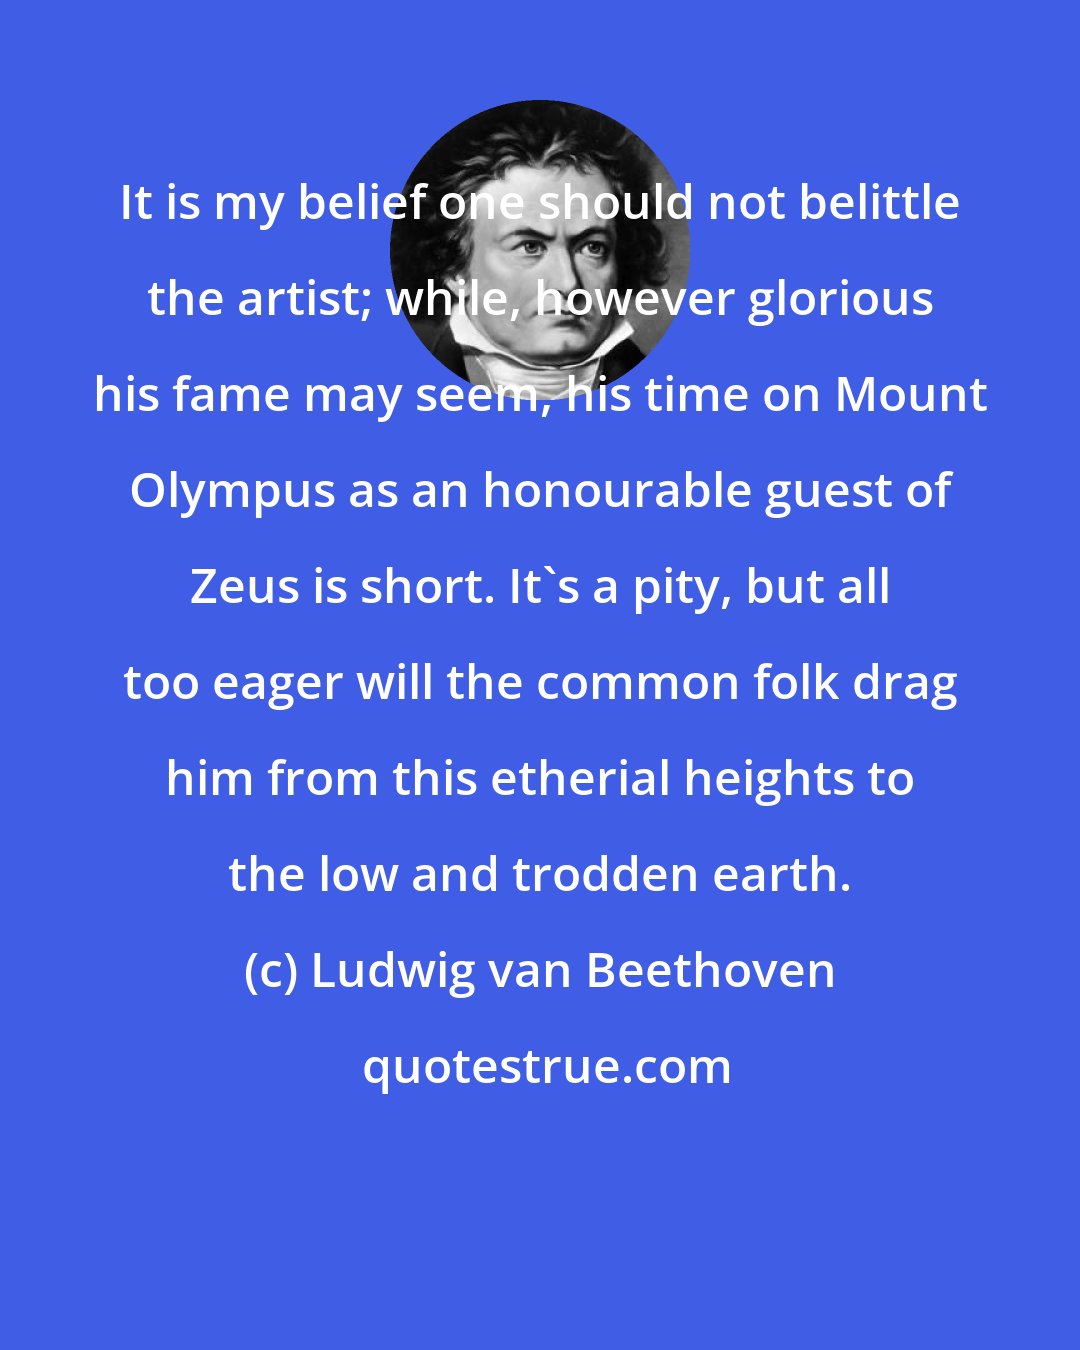 Ludwig van Beethoven: It is my belief one should not belittle the artist; while, however glorious his fame may seem, his time on Mount Olympus as an honourable guest of Zeus is short. It's a pity, but all too eager will the common folk drag him from this etherial heights to the low and trodden earth.